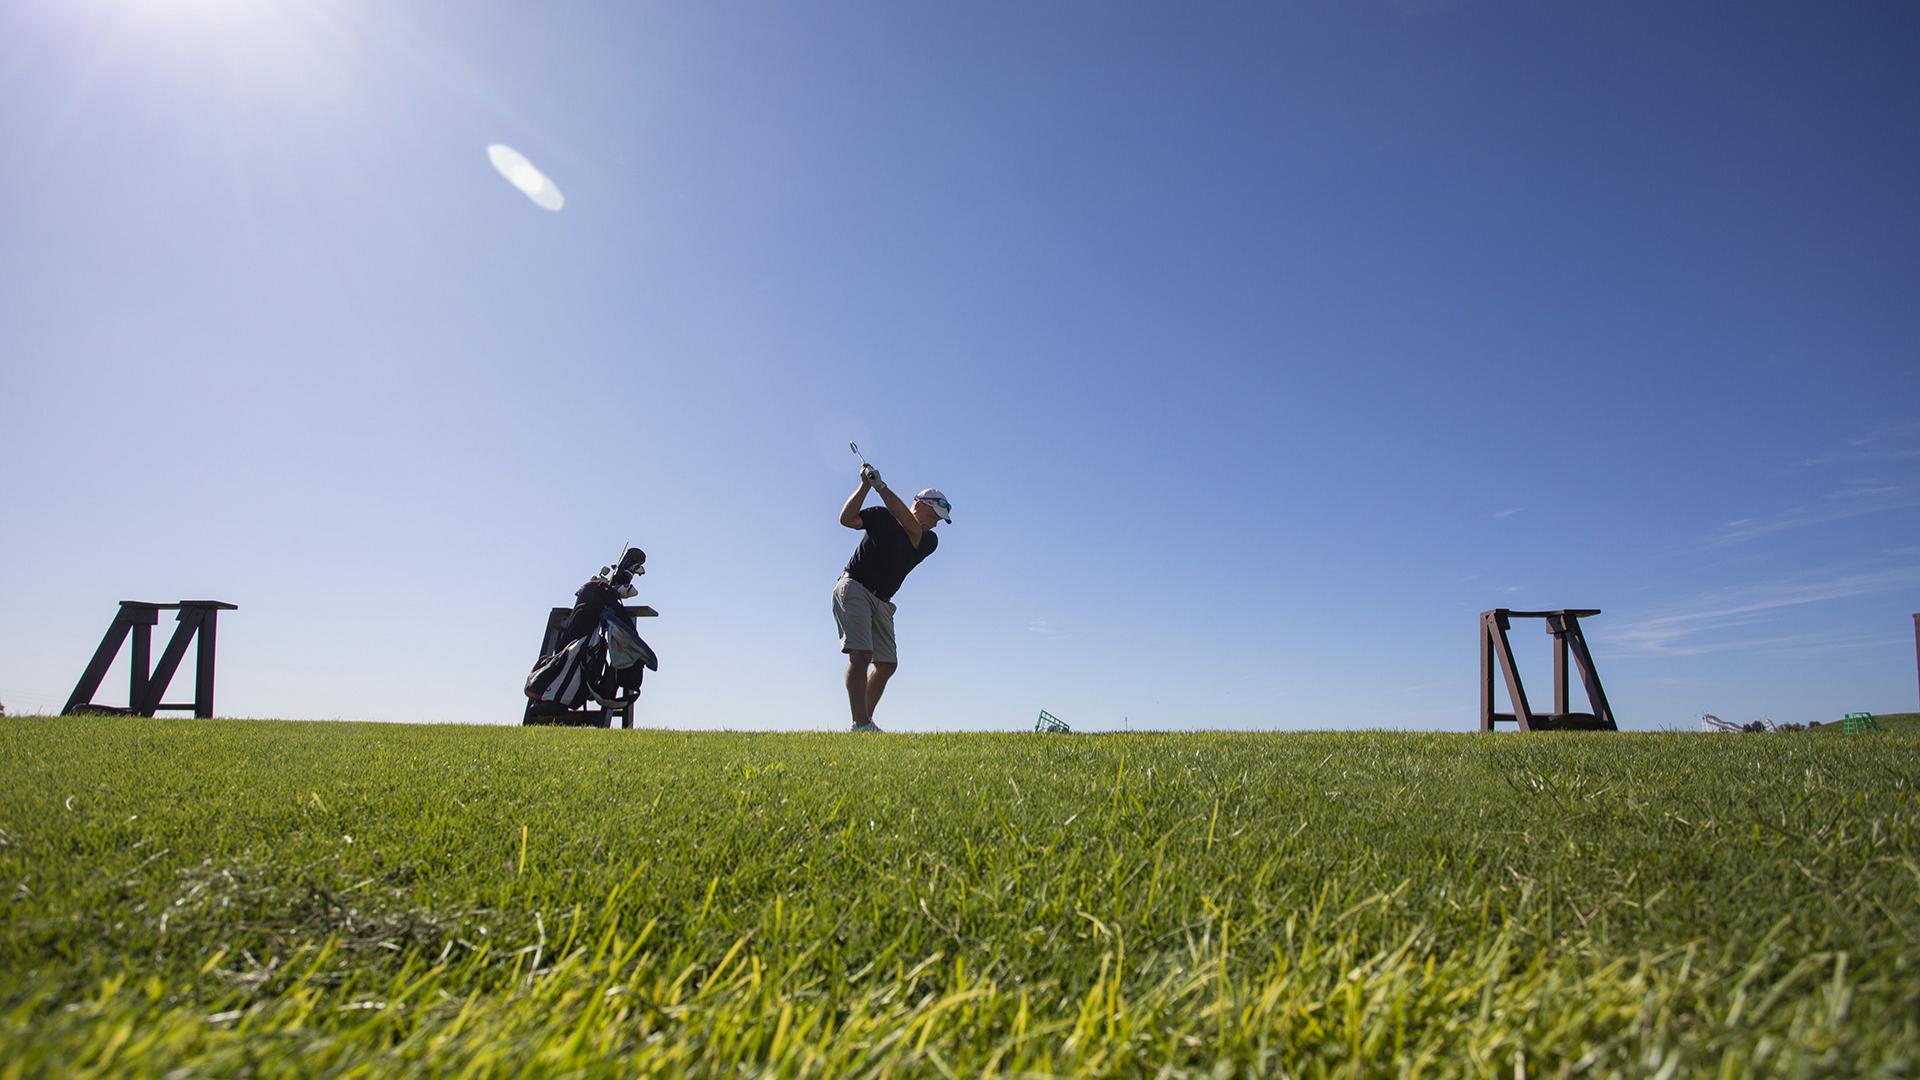 Practice your golf at our Golf Academy!